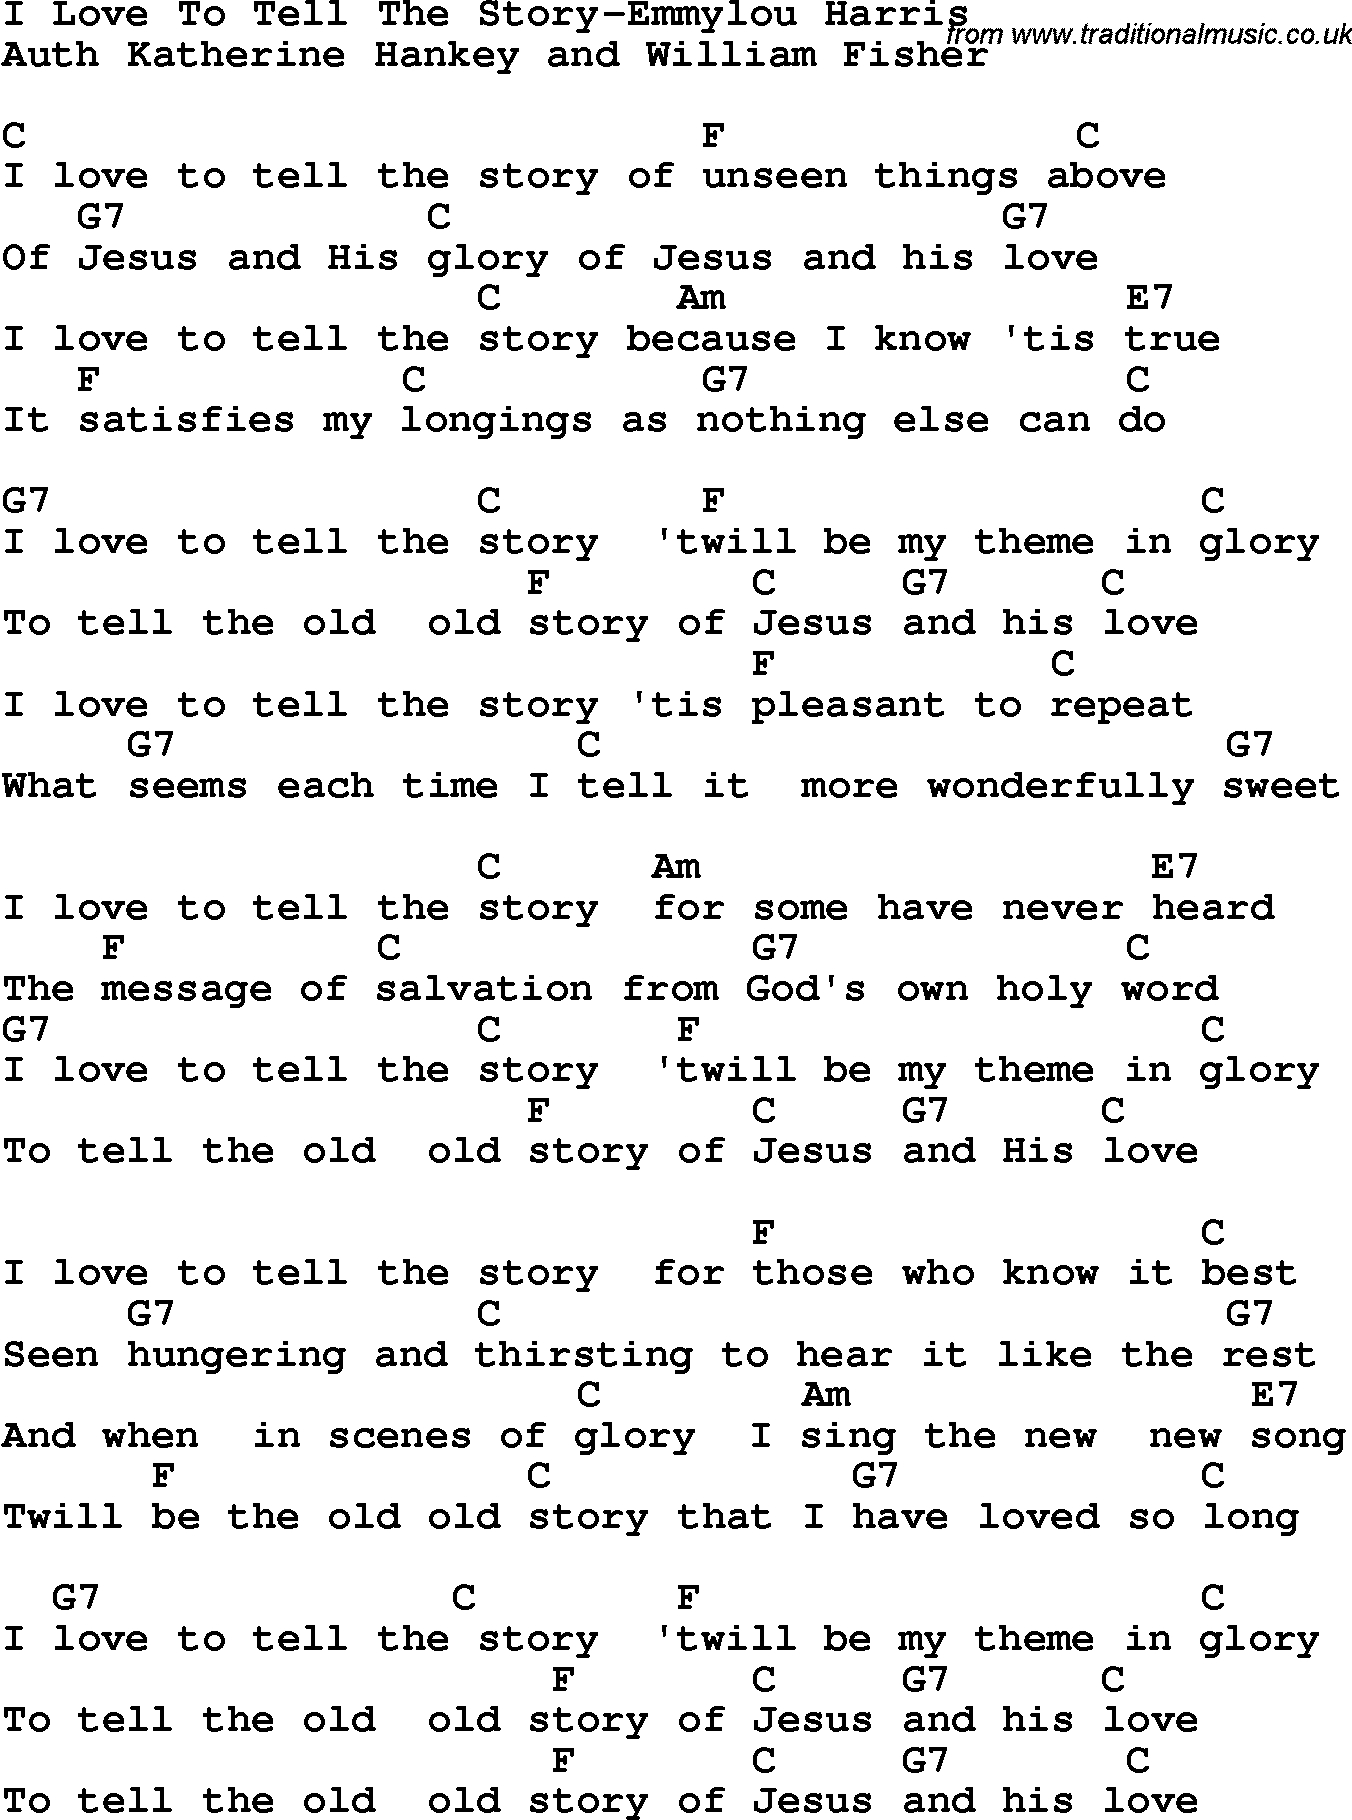 Love Story Chords Country Southern And Bluegrass Gospel Song I Love To Tell The Story